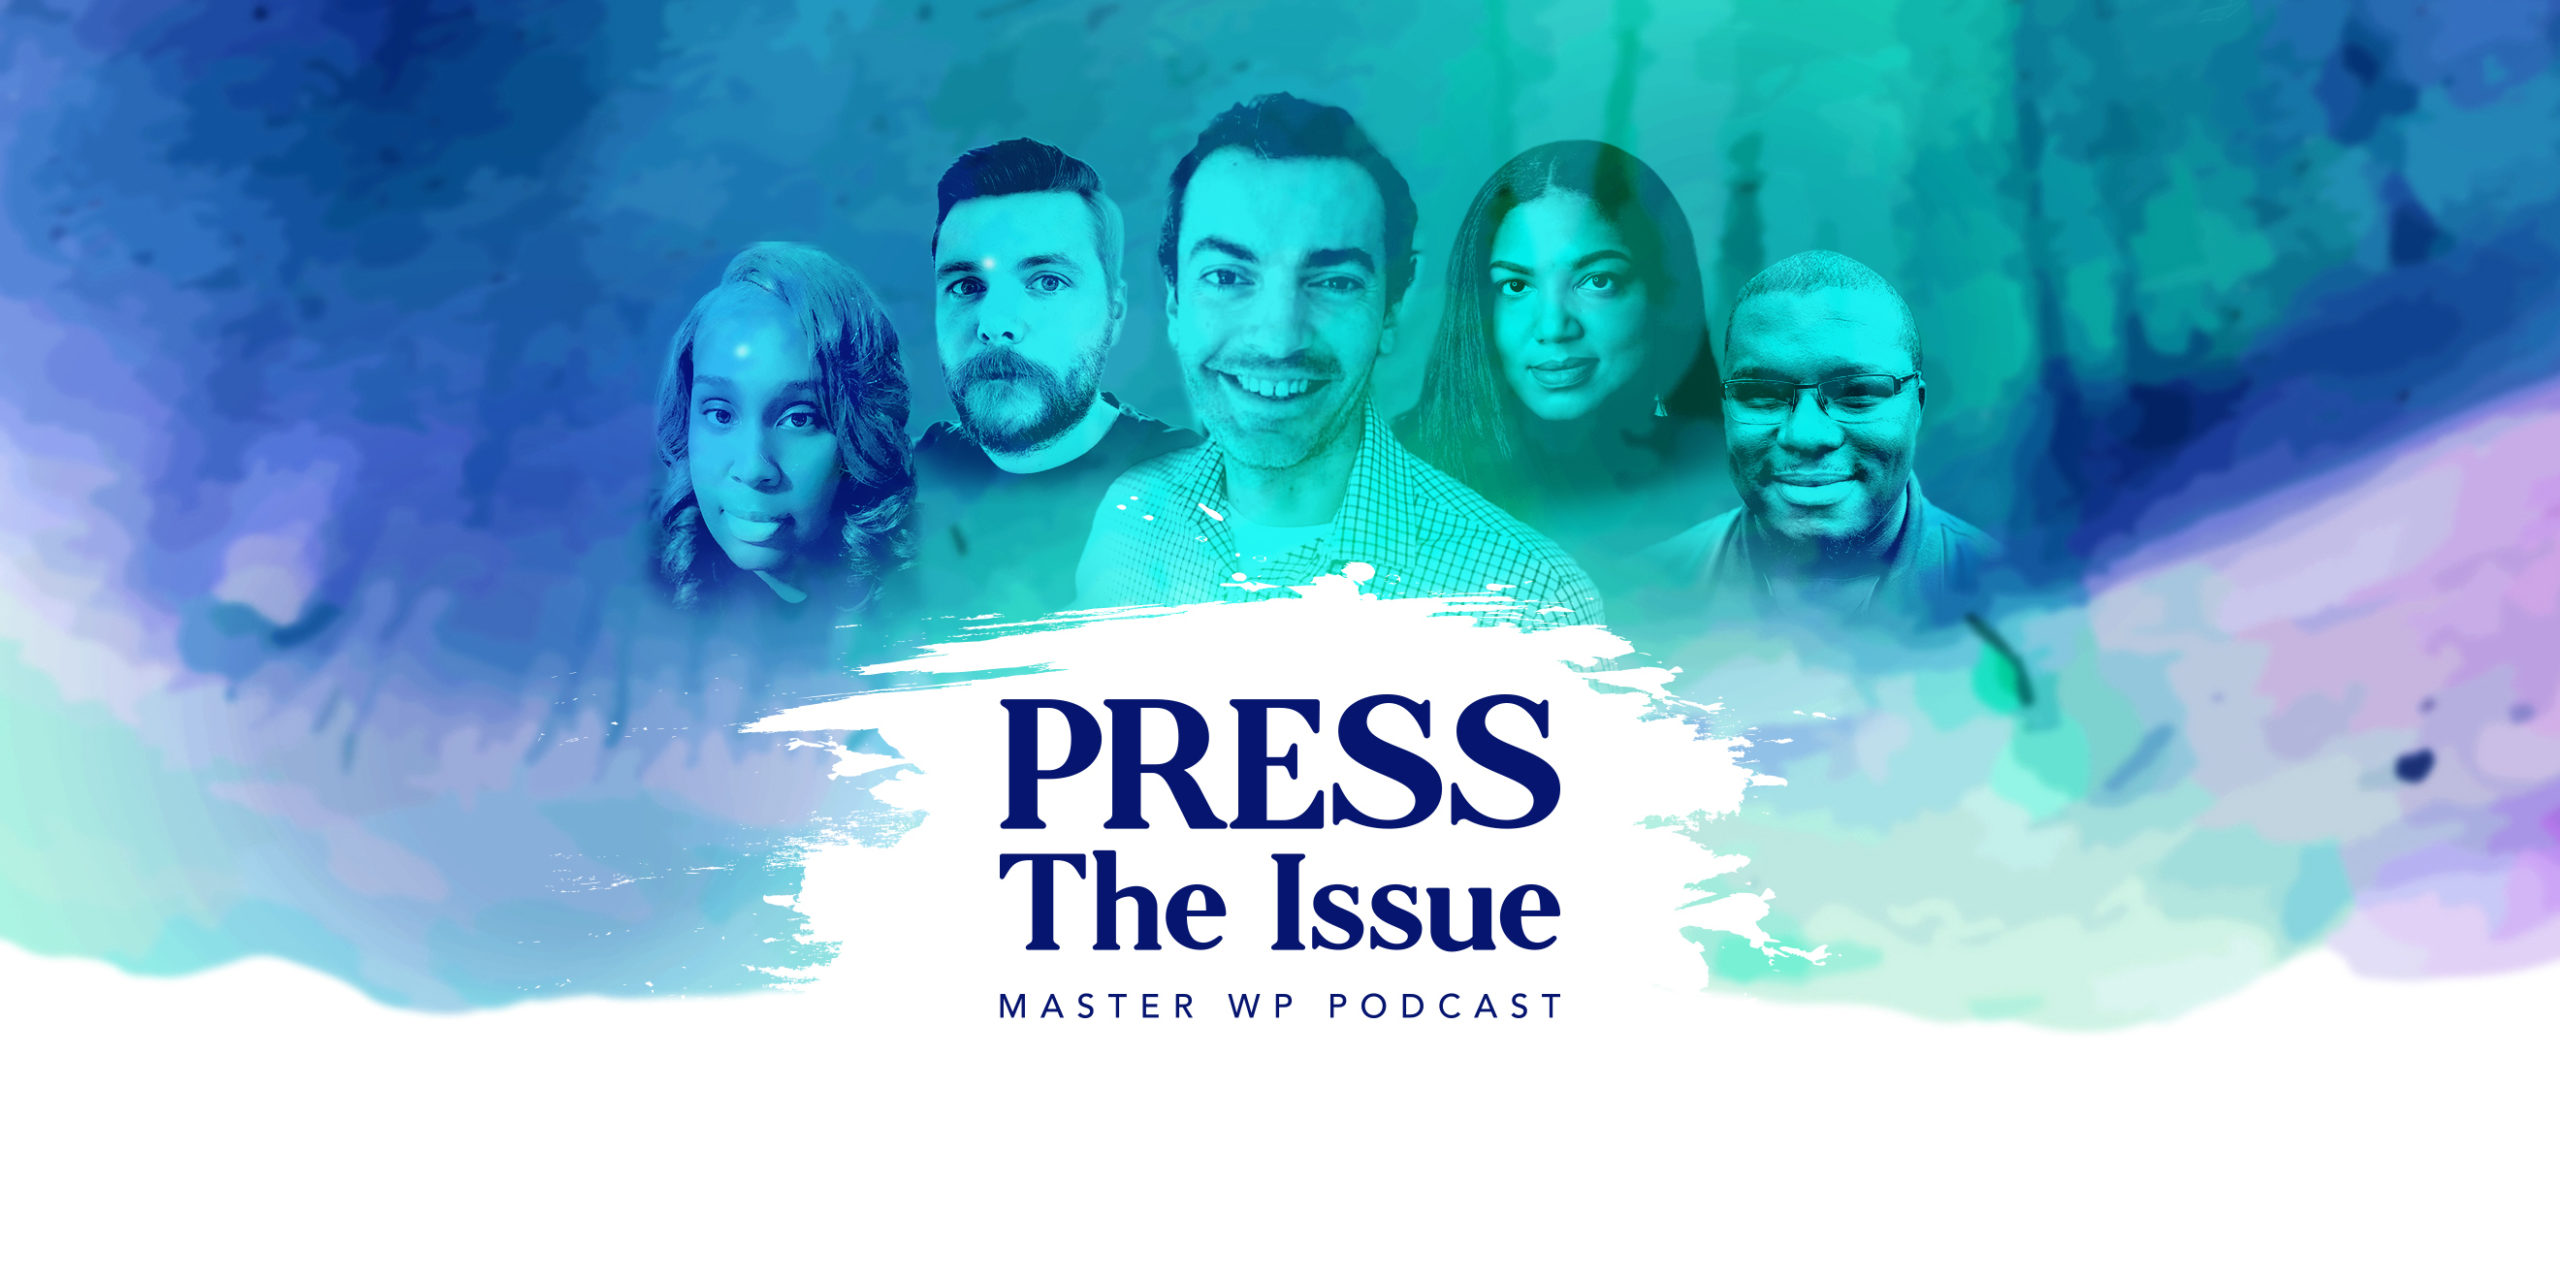 Press The Issue, a Master WP Podcast featuring Nyasha Green, Brian Coords, Rob Howard, Monet Davenport, and Teron Bullock